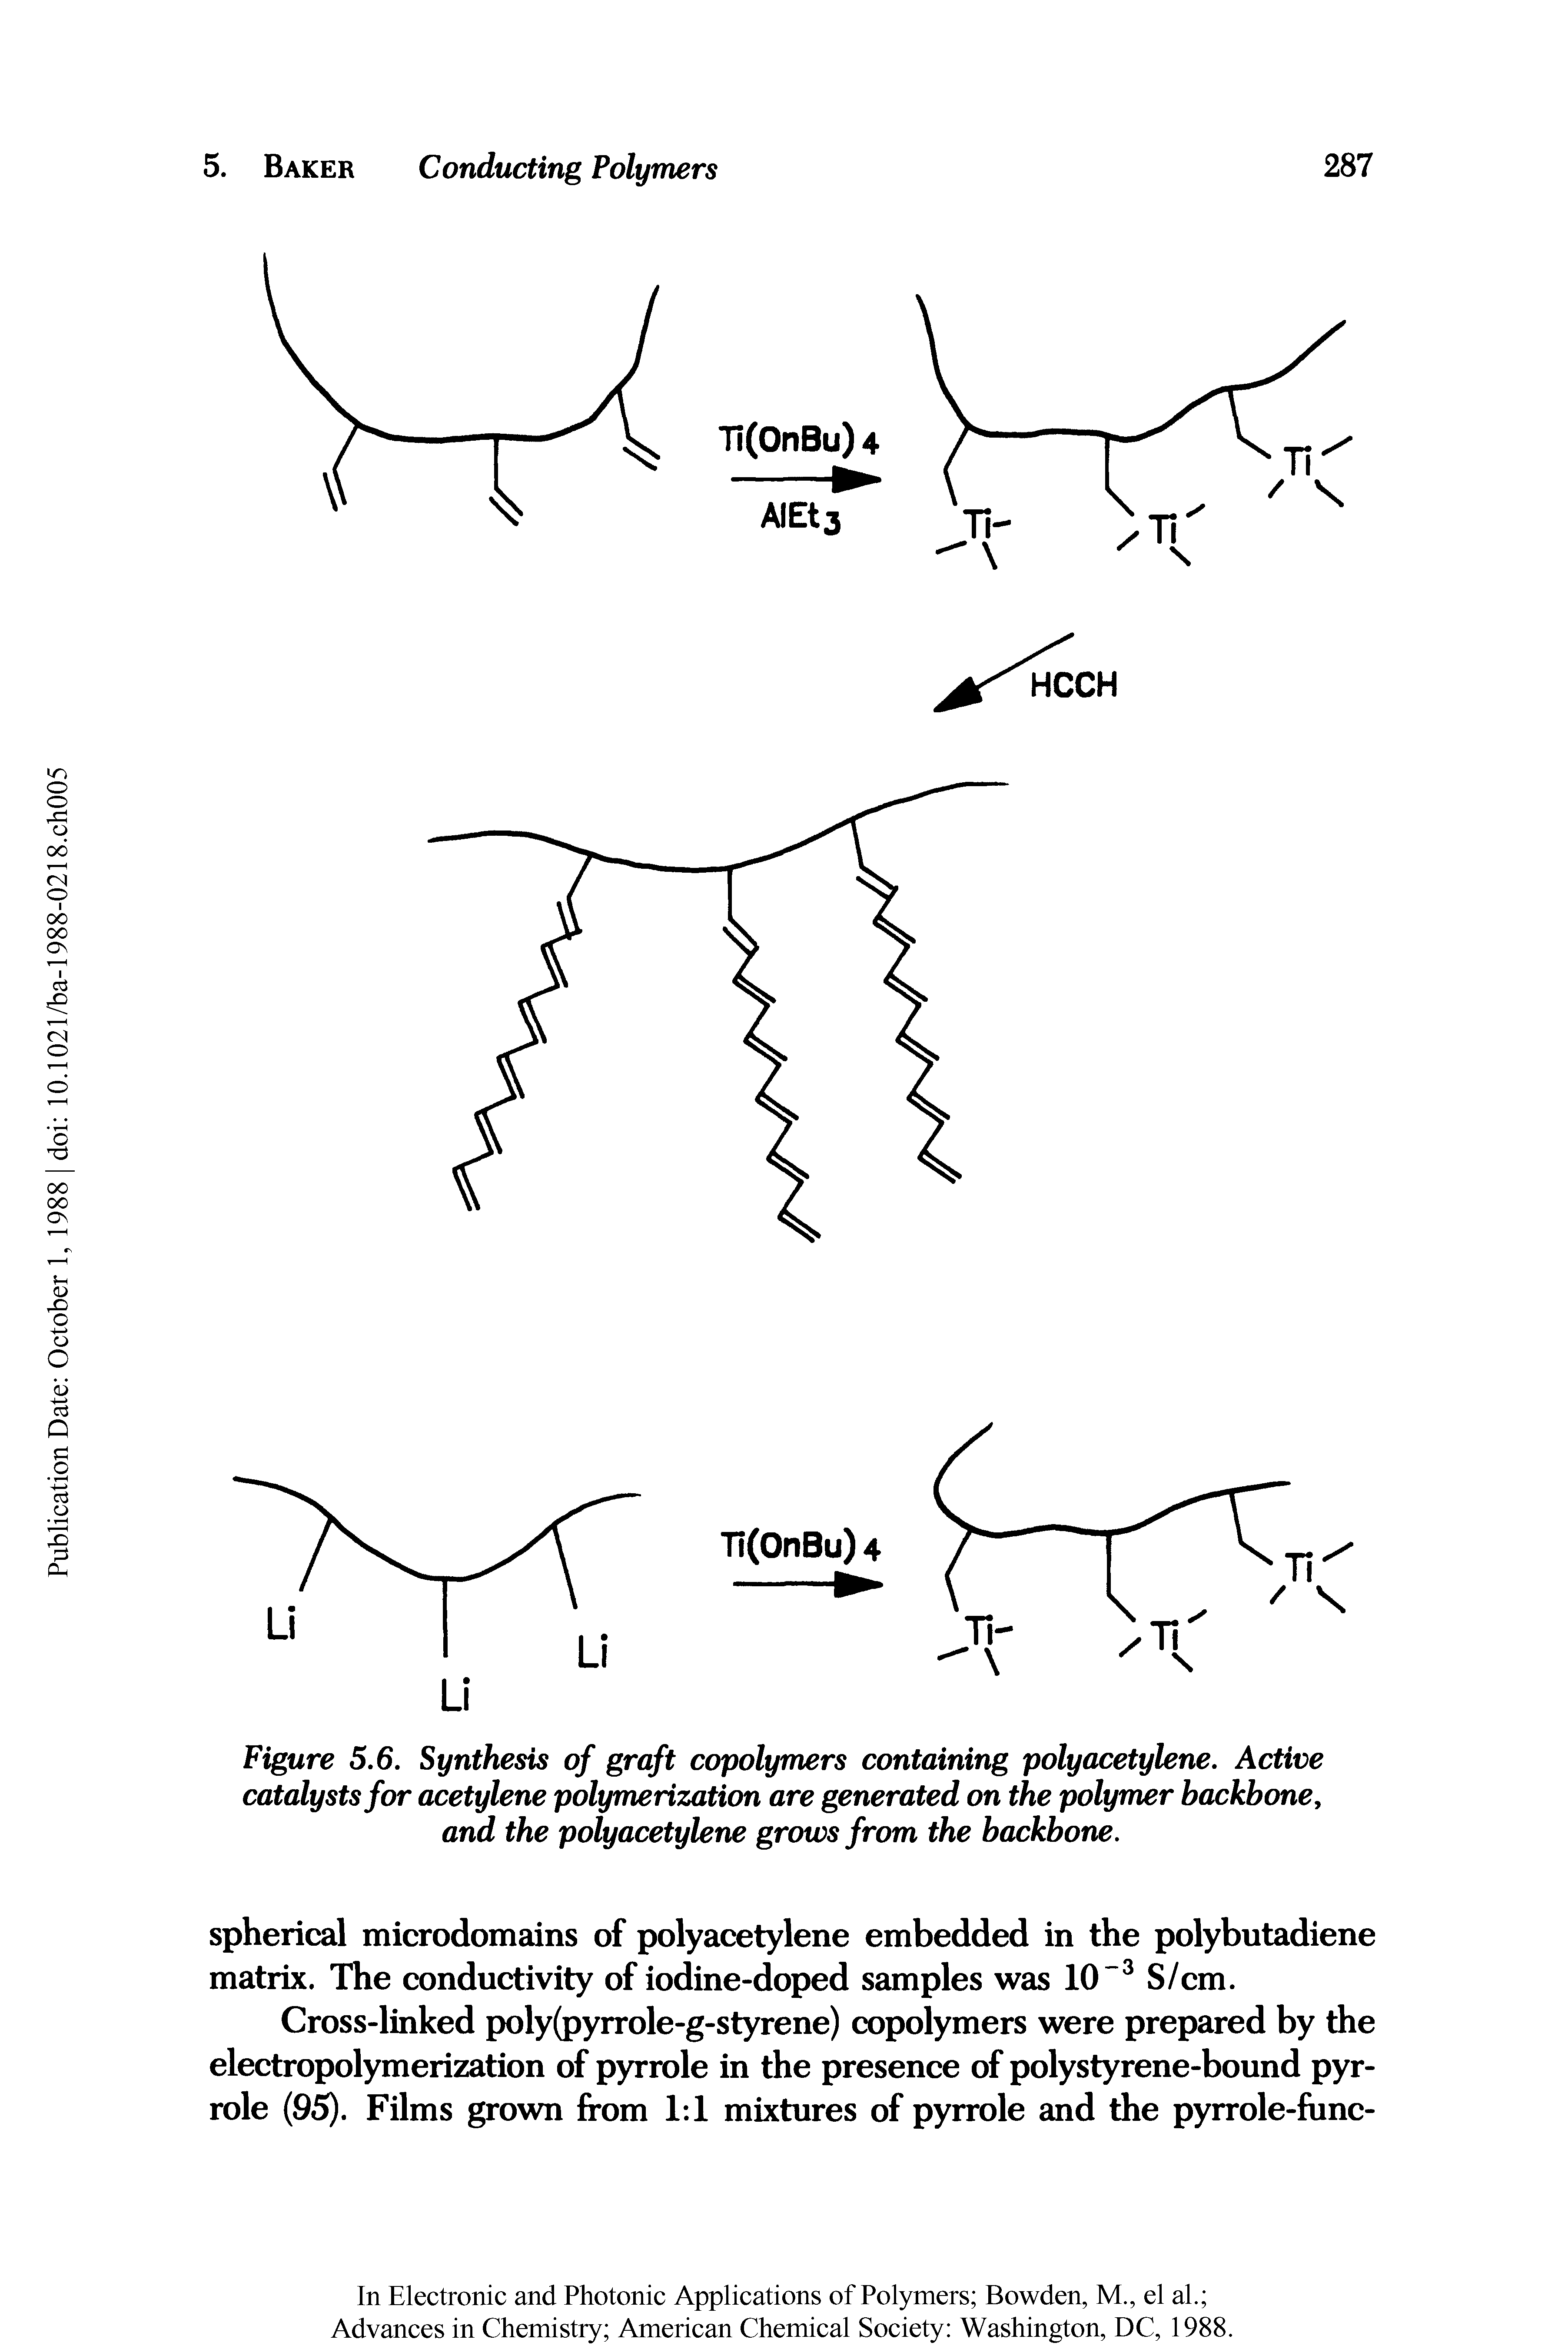 Figure 5.6. Synthesis of graft copolymers containing poly acetylene. Active catalysts for acetylene polymerization are generated on the polymer backbone, and the polyacetylene grows from the backbone.